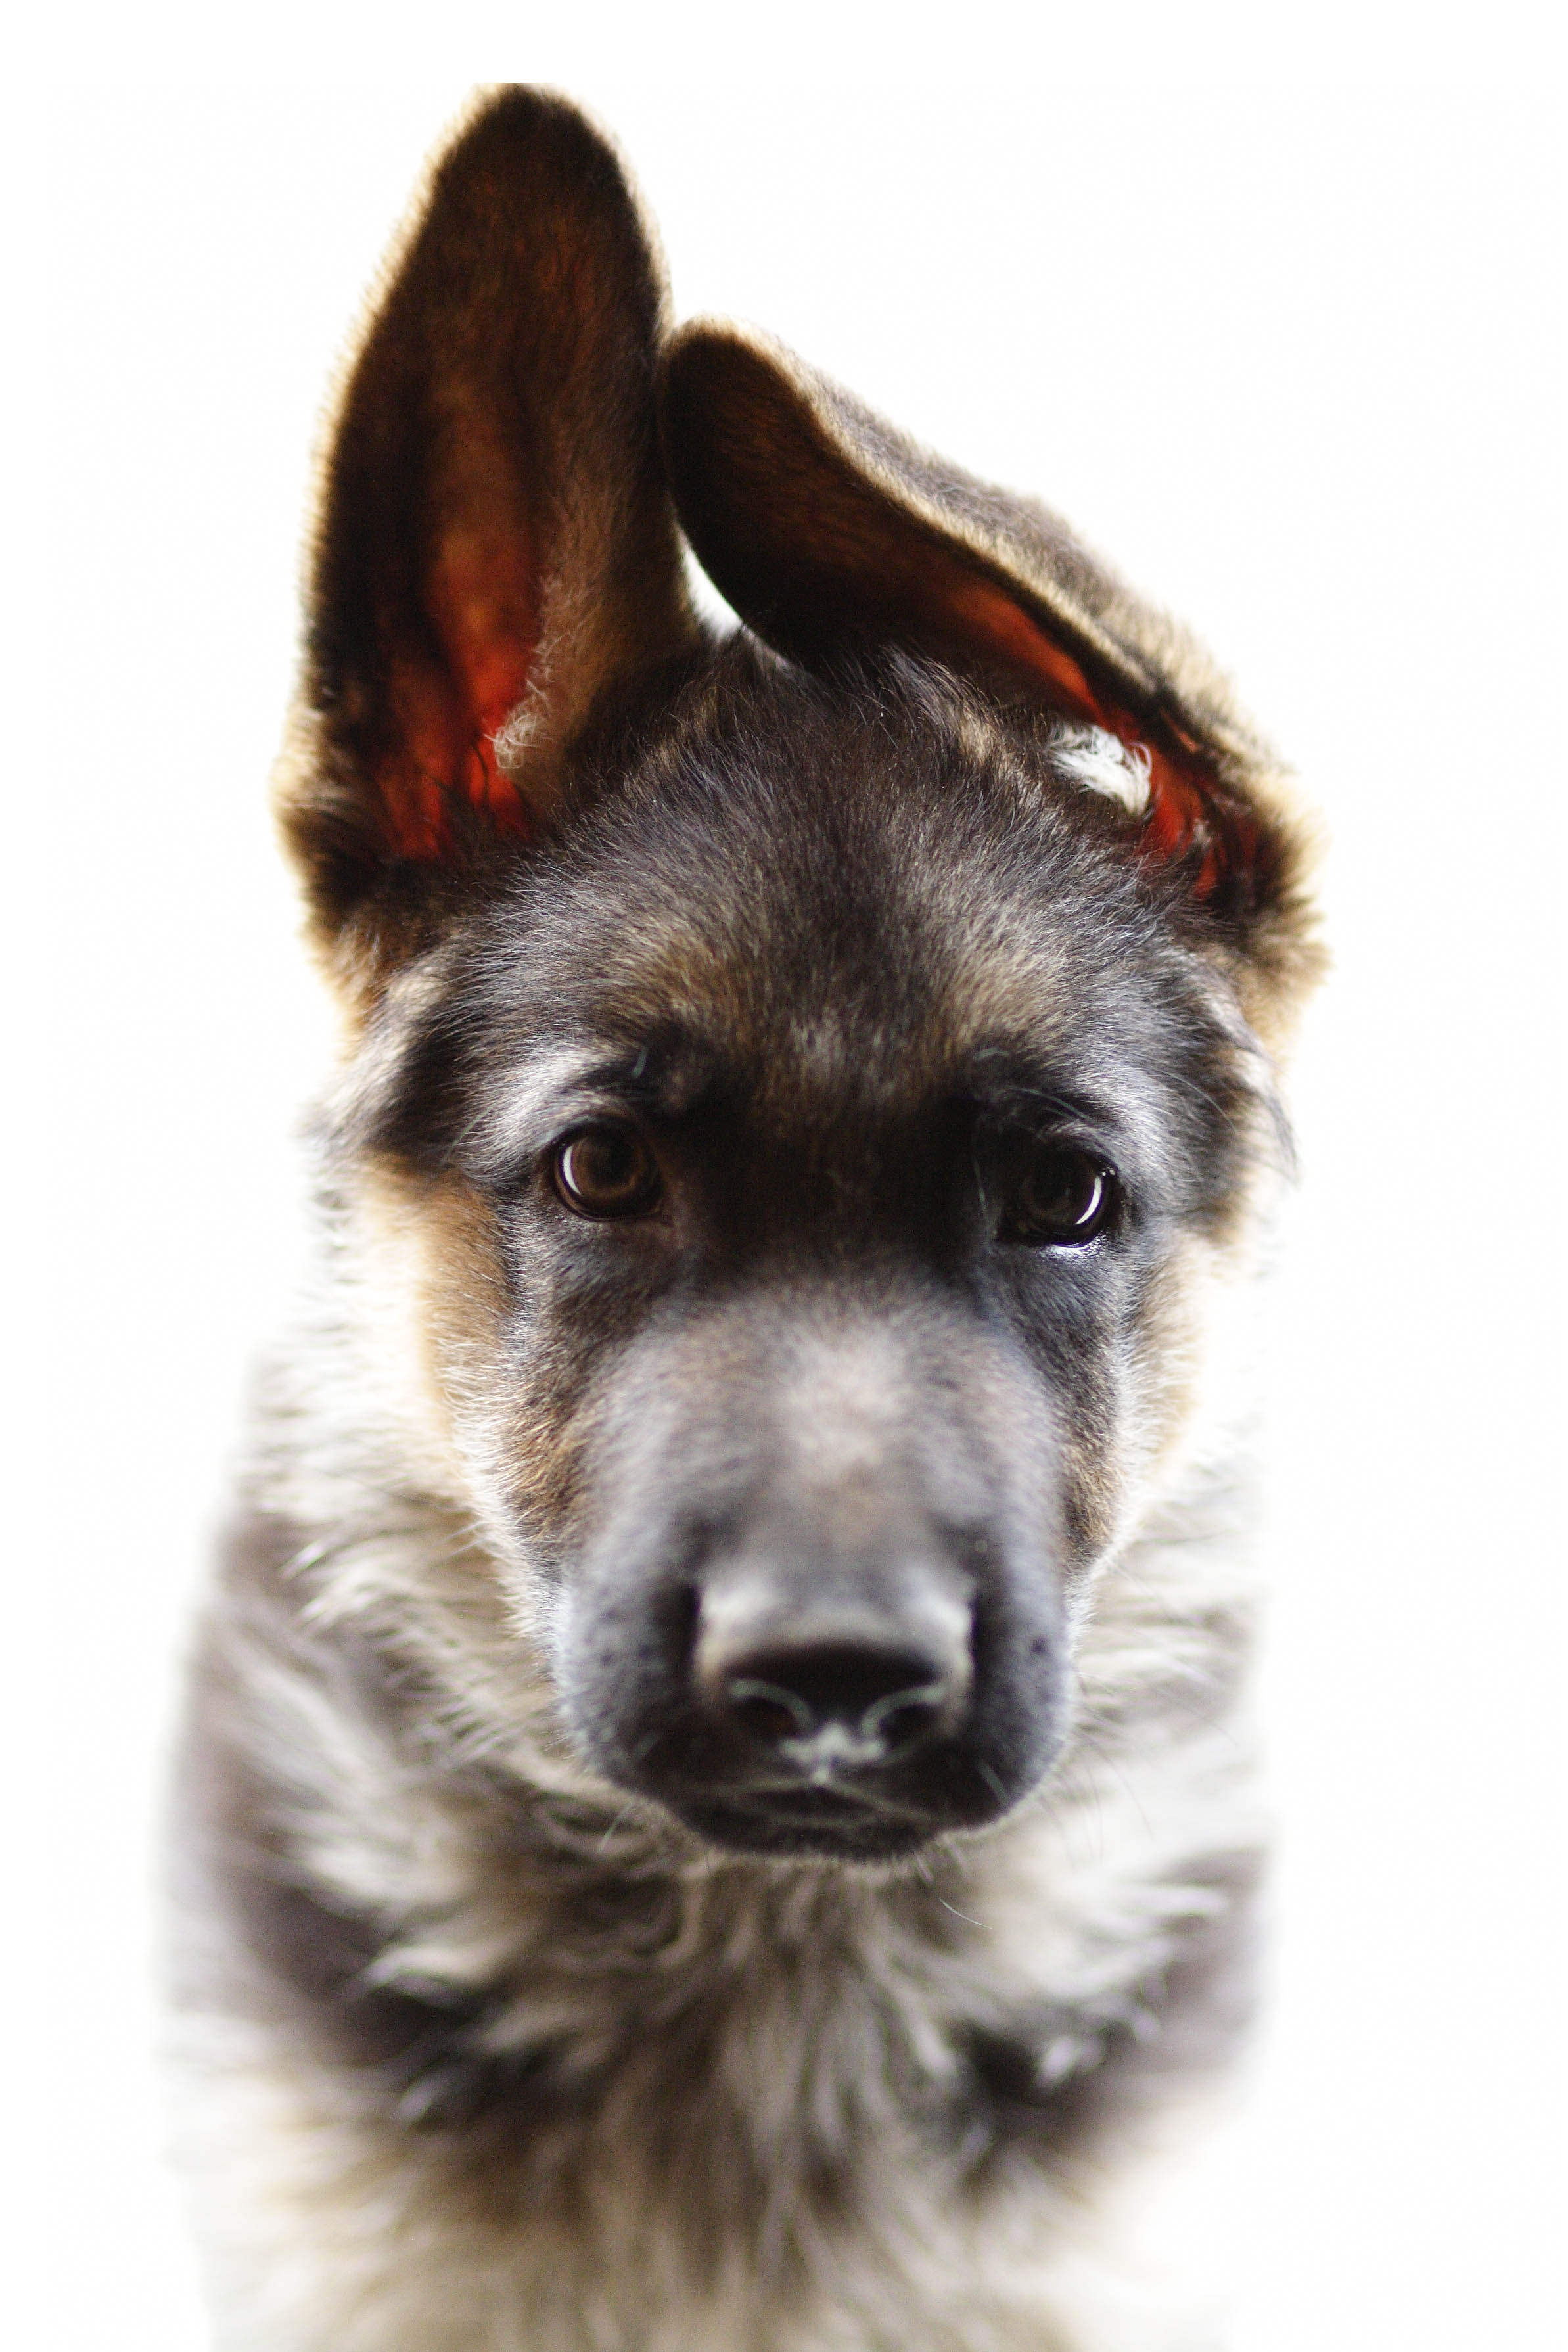 How Much Are You Spending on Your Dog’s Ears?